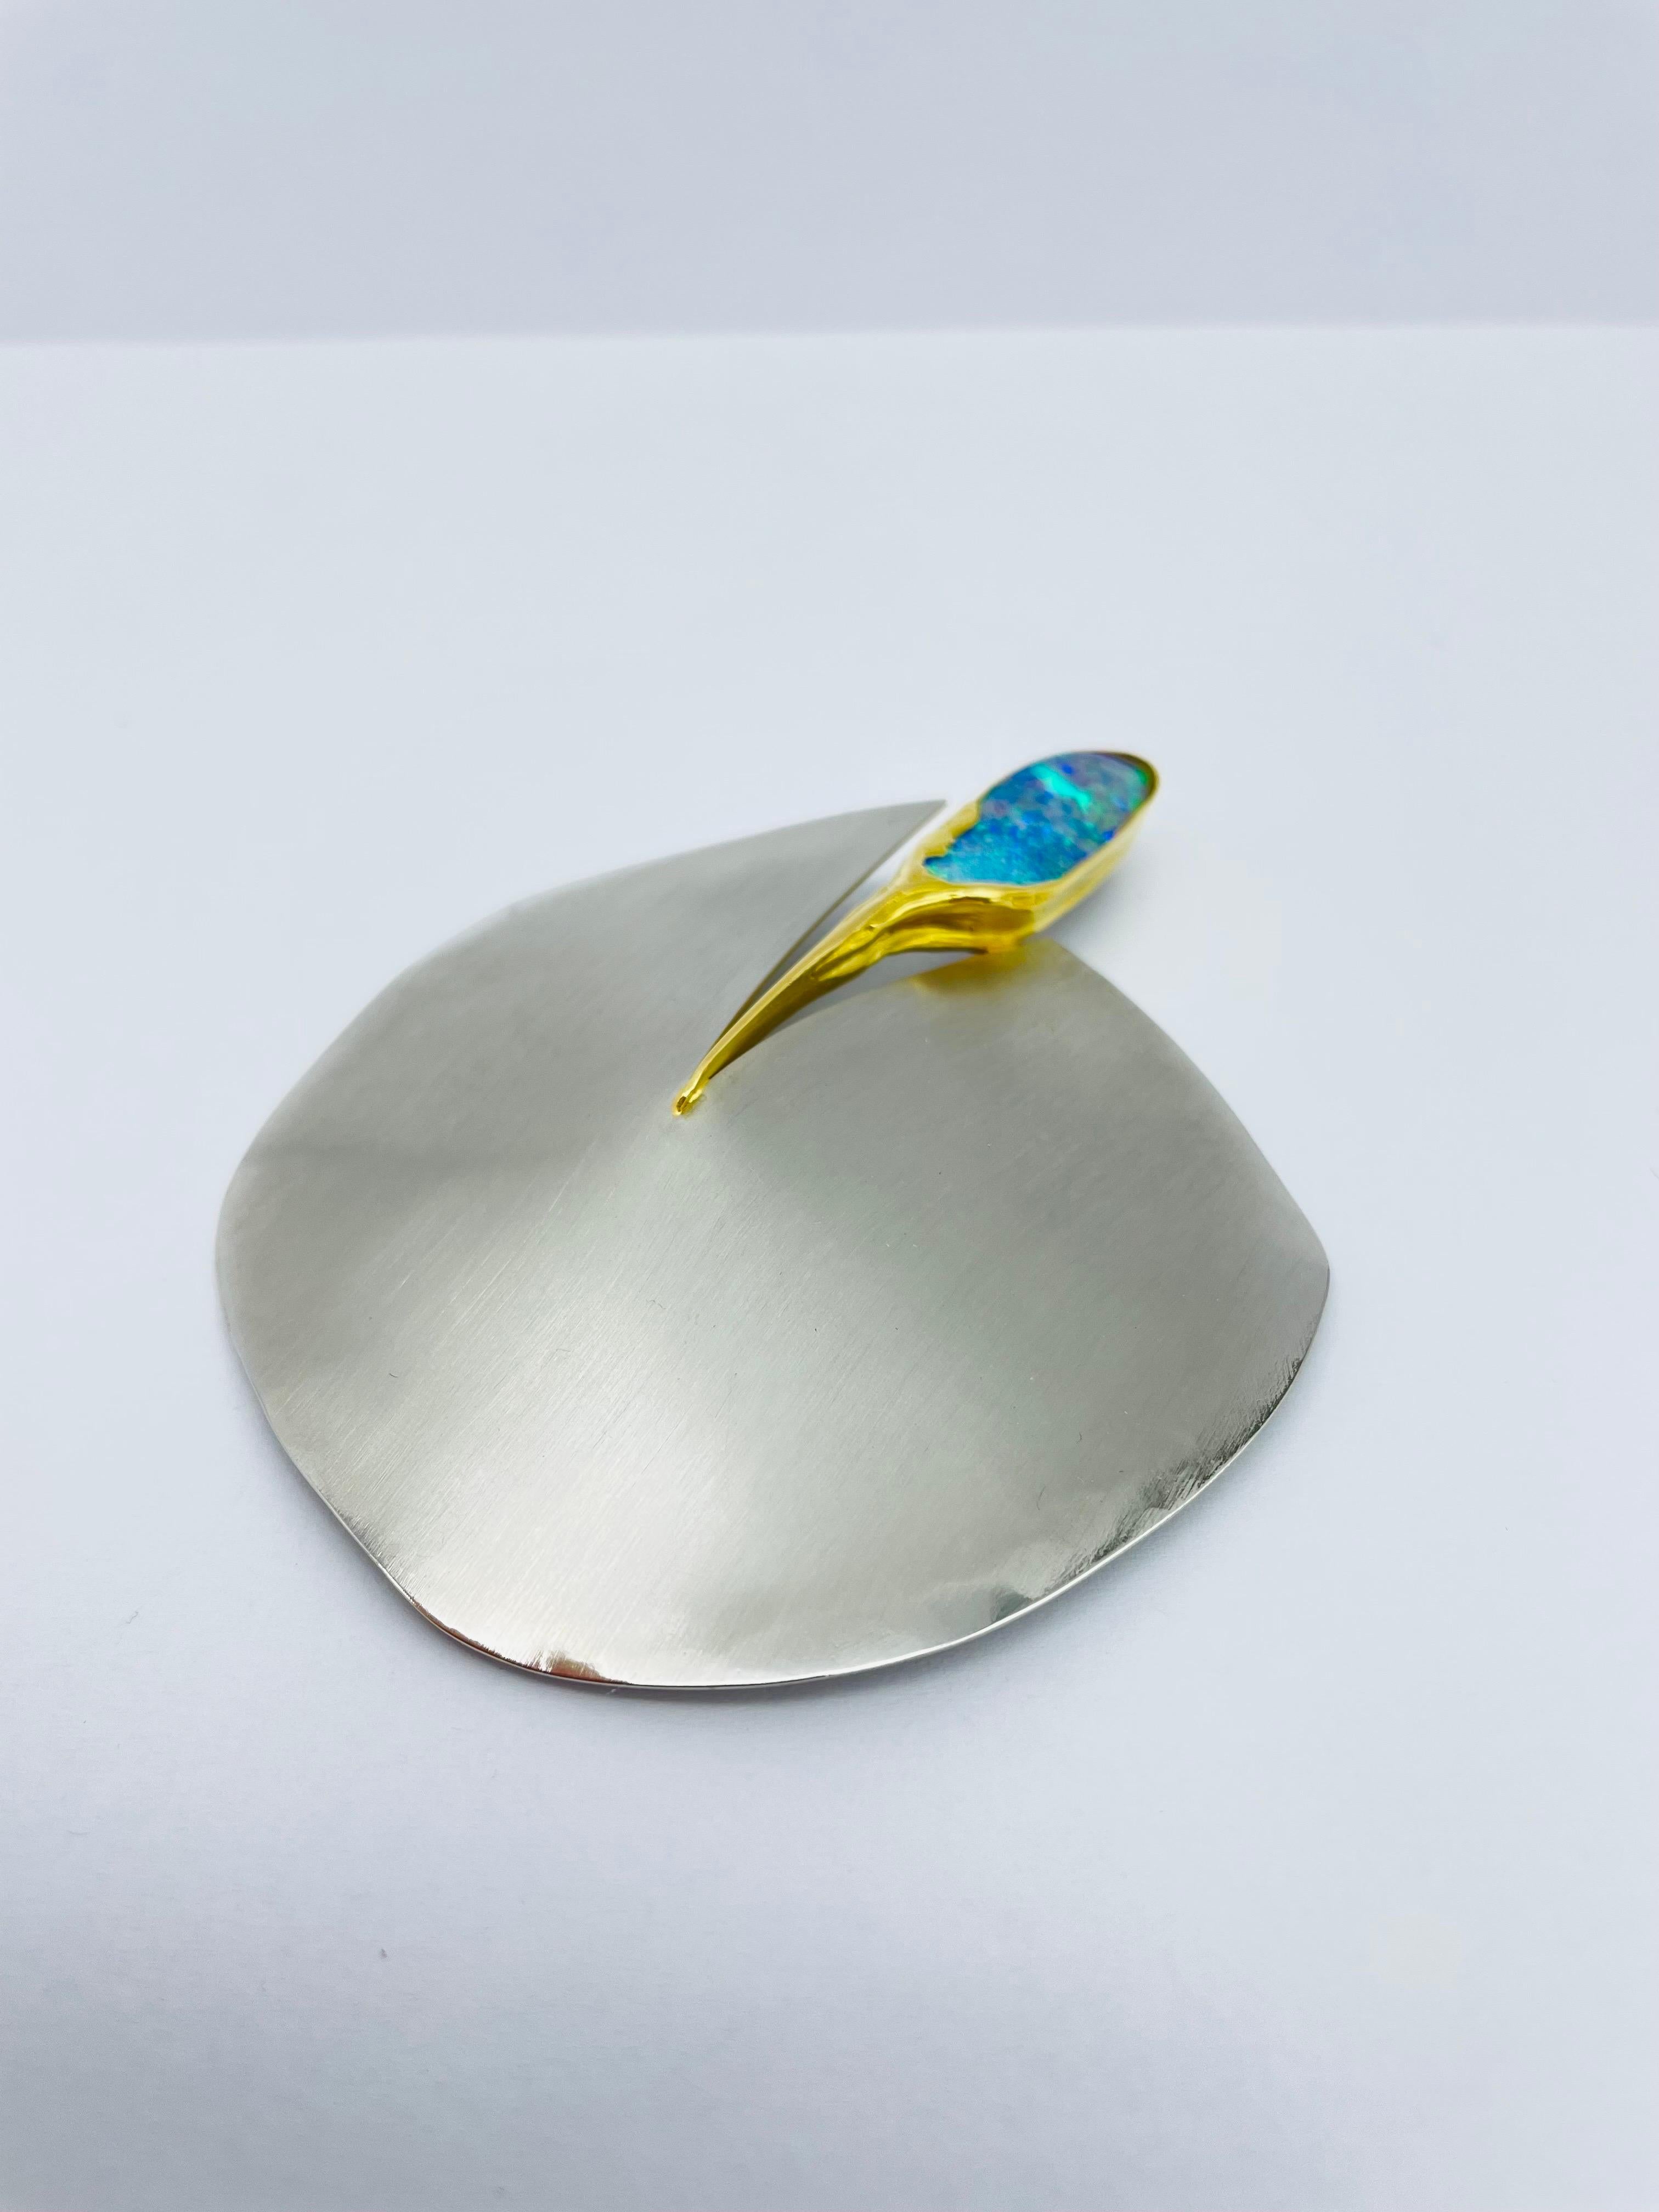 Bicolor Platinum/18k Gold Brooch-Pendant with Australian Opal, Unique In Good Condition For Sale In Berlin, BE